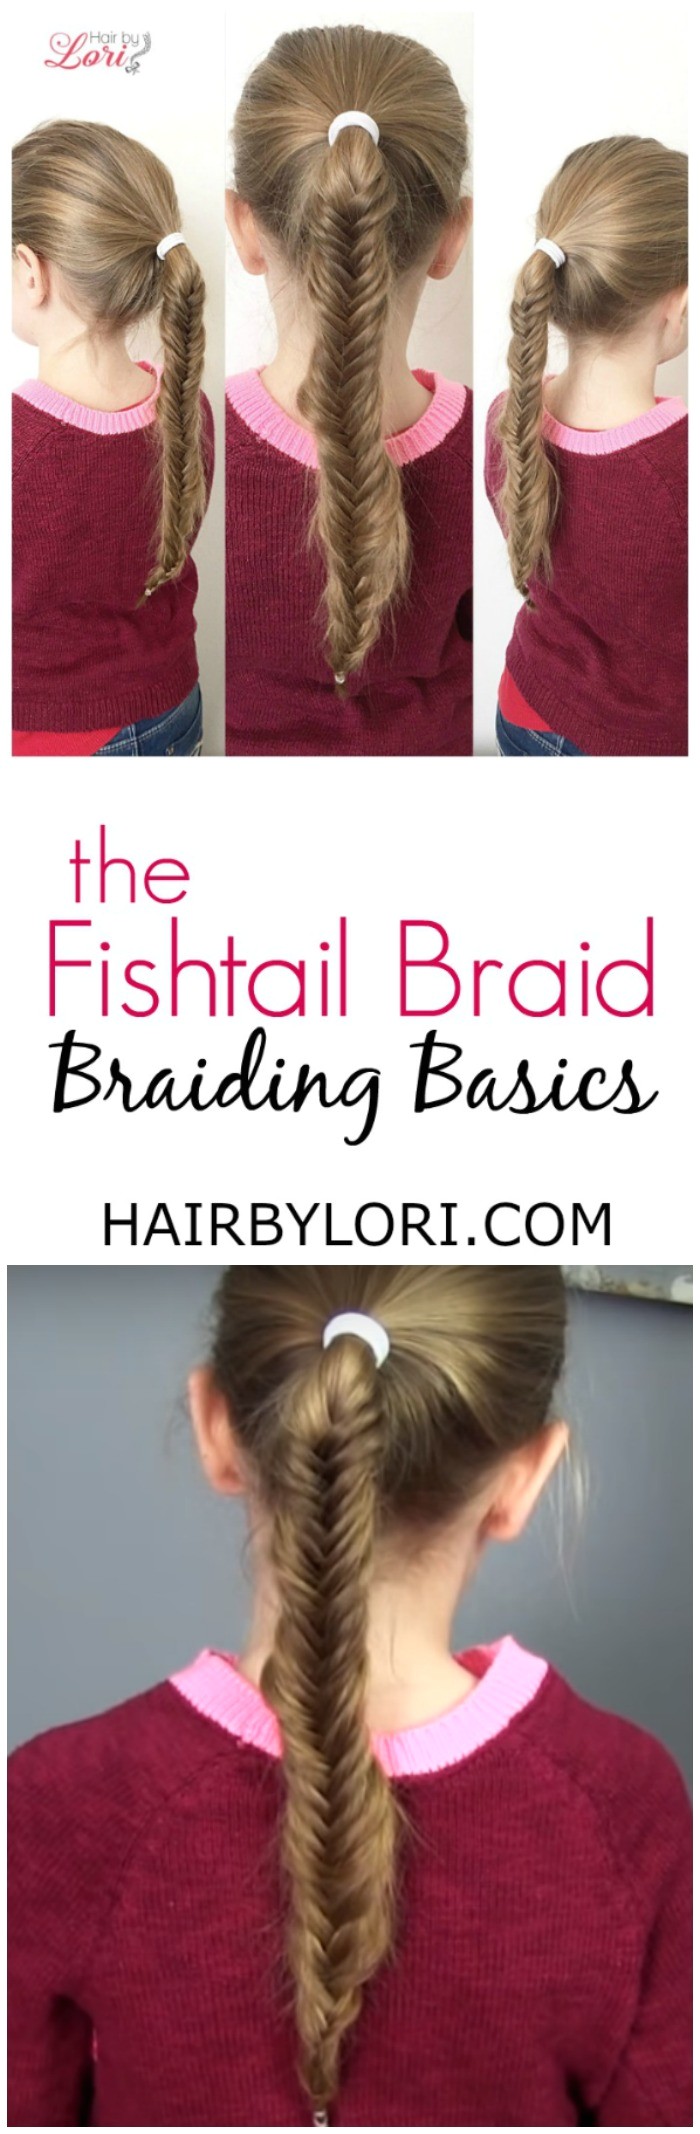 Easy Tutorial Video How To Style The Fish Tail Braid